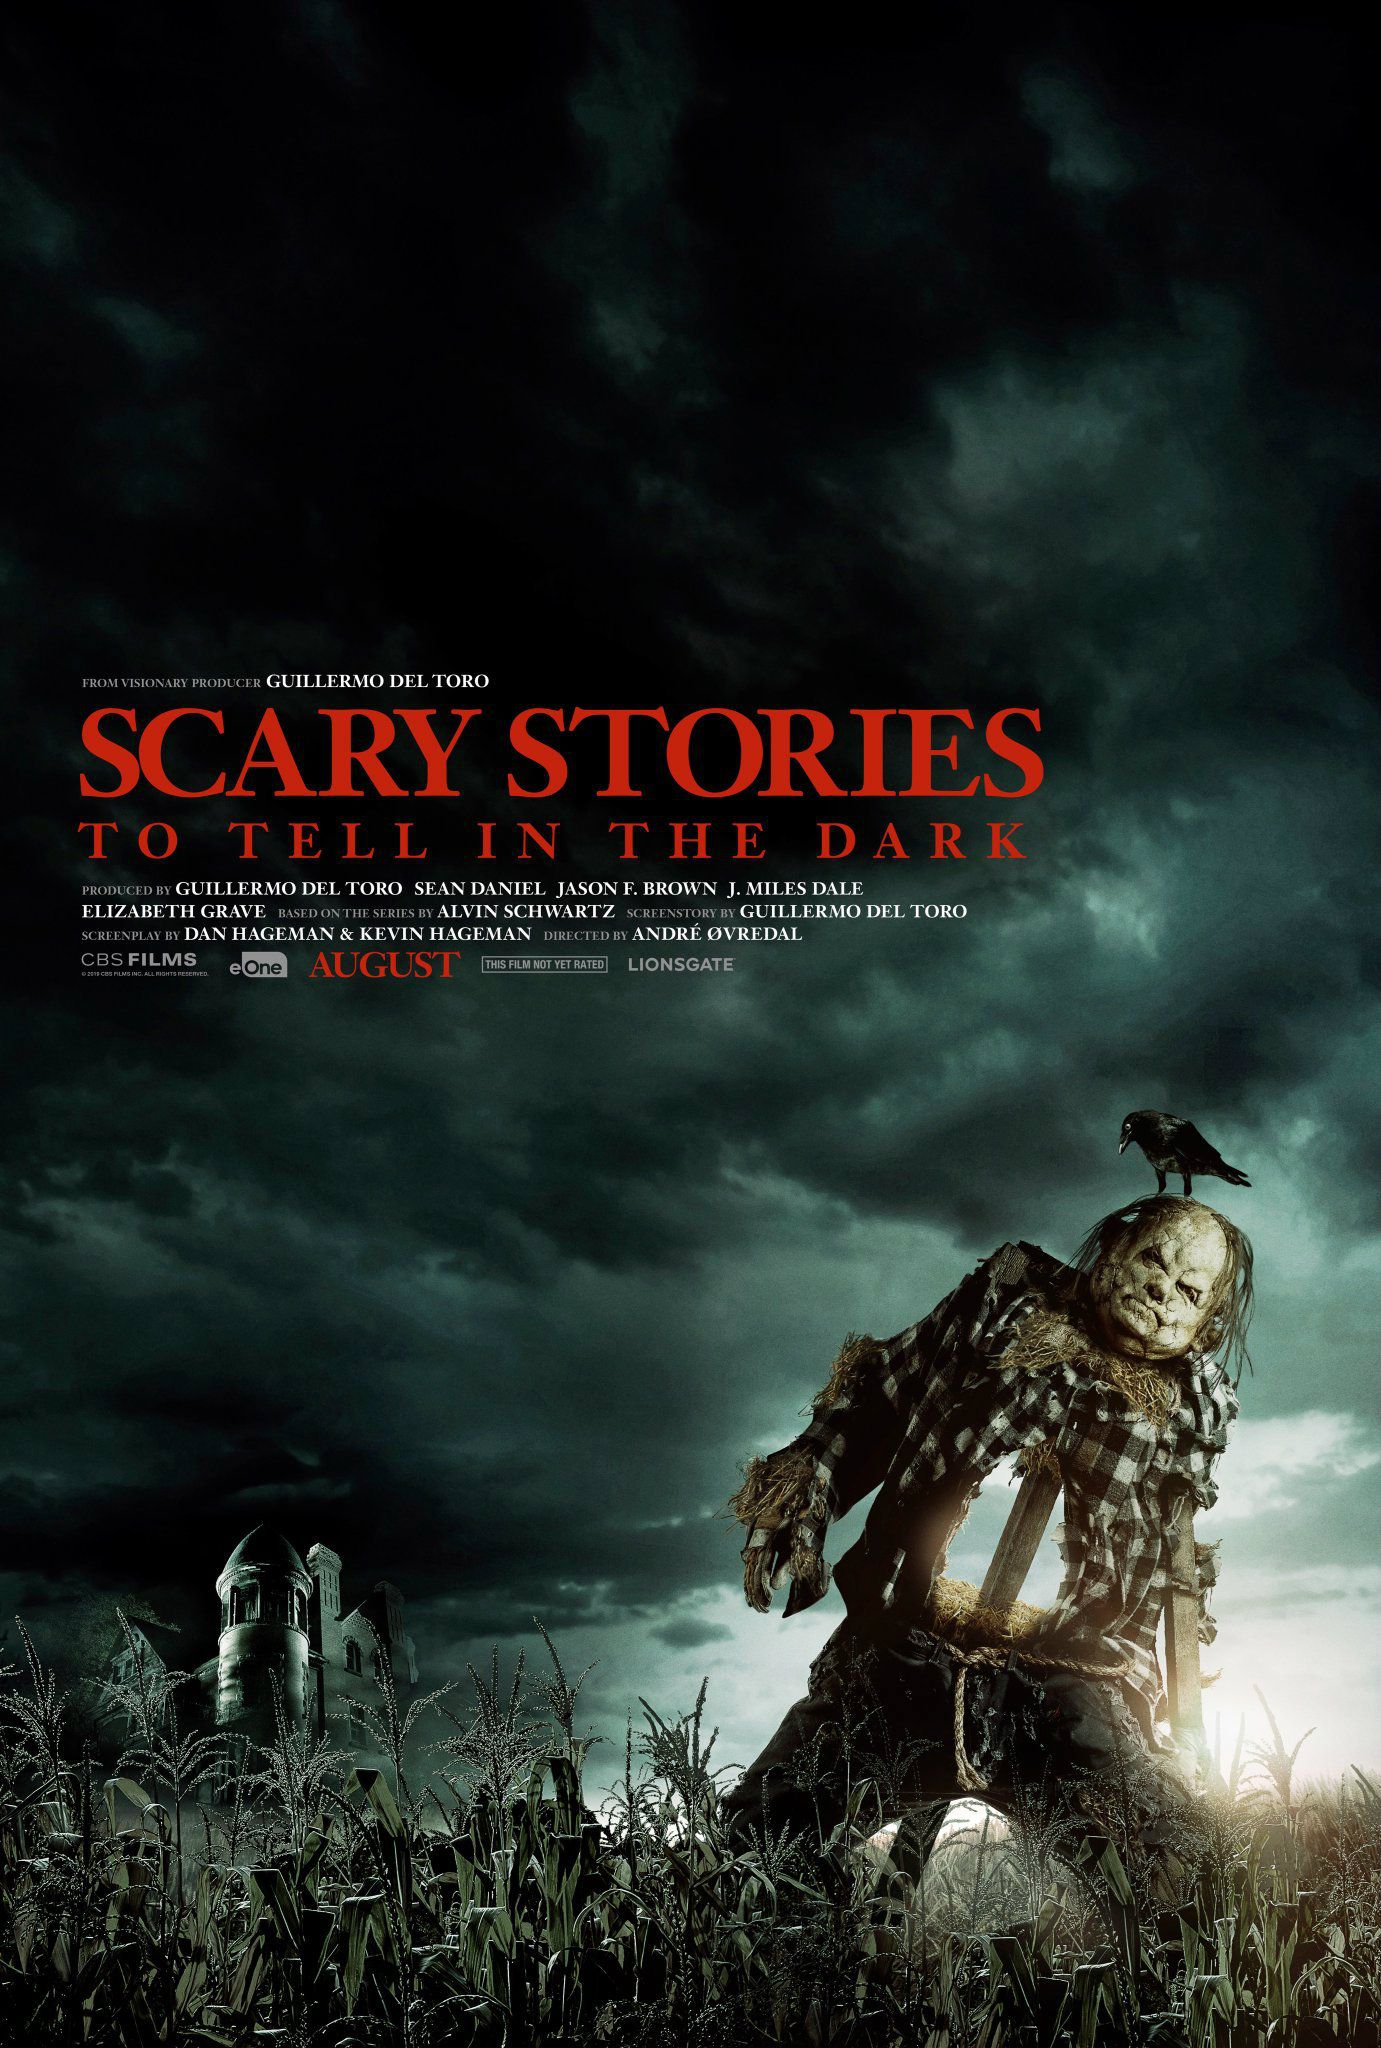 Scary Stories to Tell in the Dark Movie TV Spots: Who Took My Big Toe?